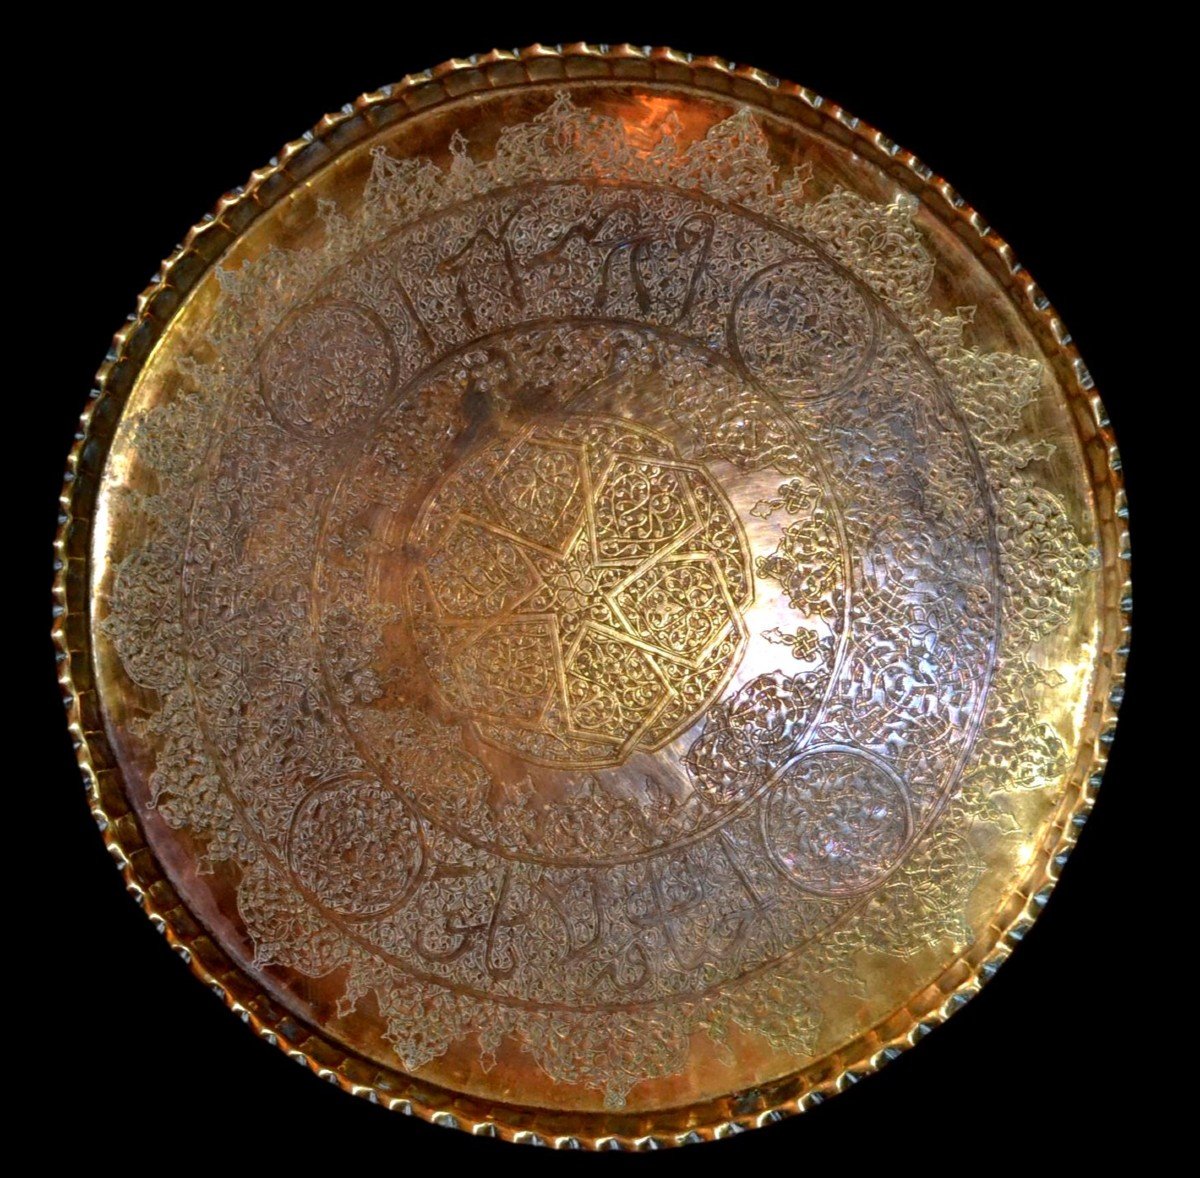 Large Antique Tray, D 49 Cm, In Chiseled Copper, Middle East, Second Half Of The 19th Century